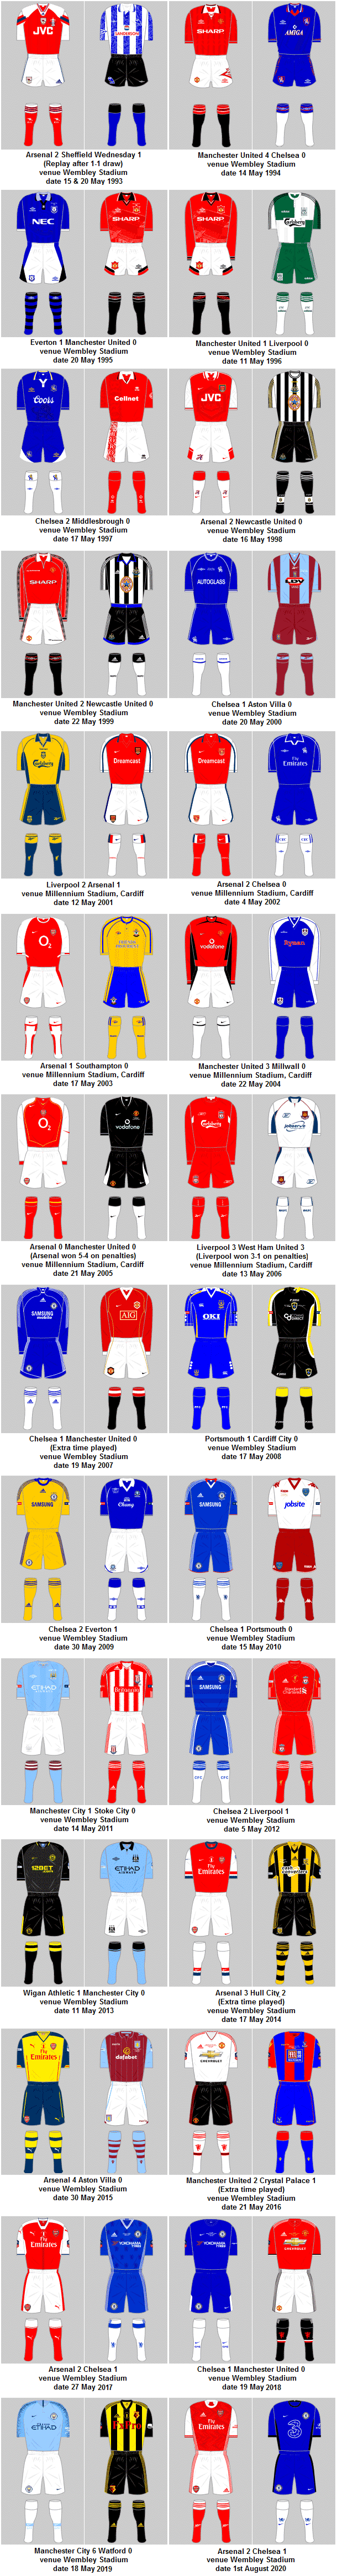 FA Cup Final Playing Kits 1992-93 to 2019-20